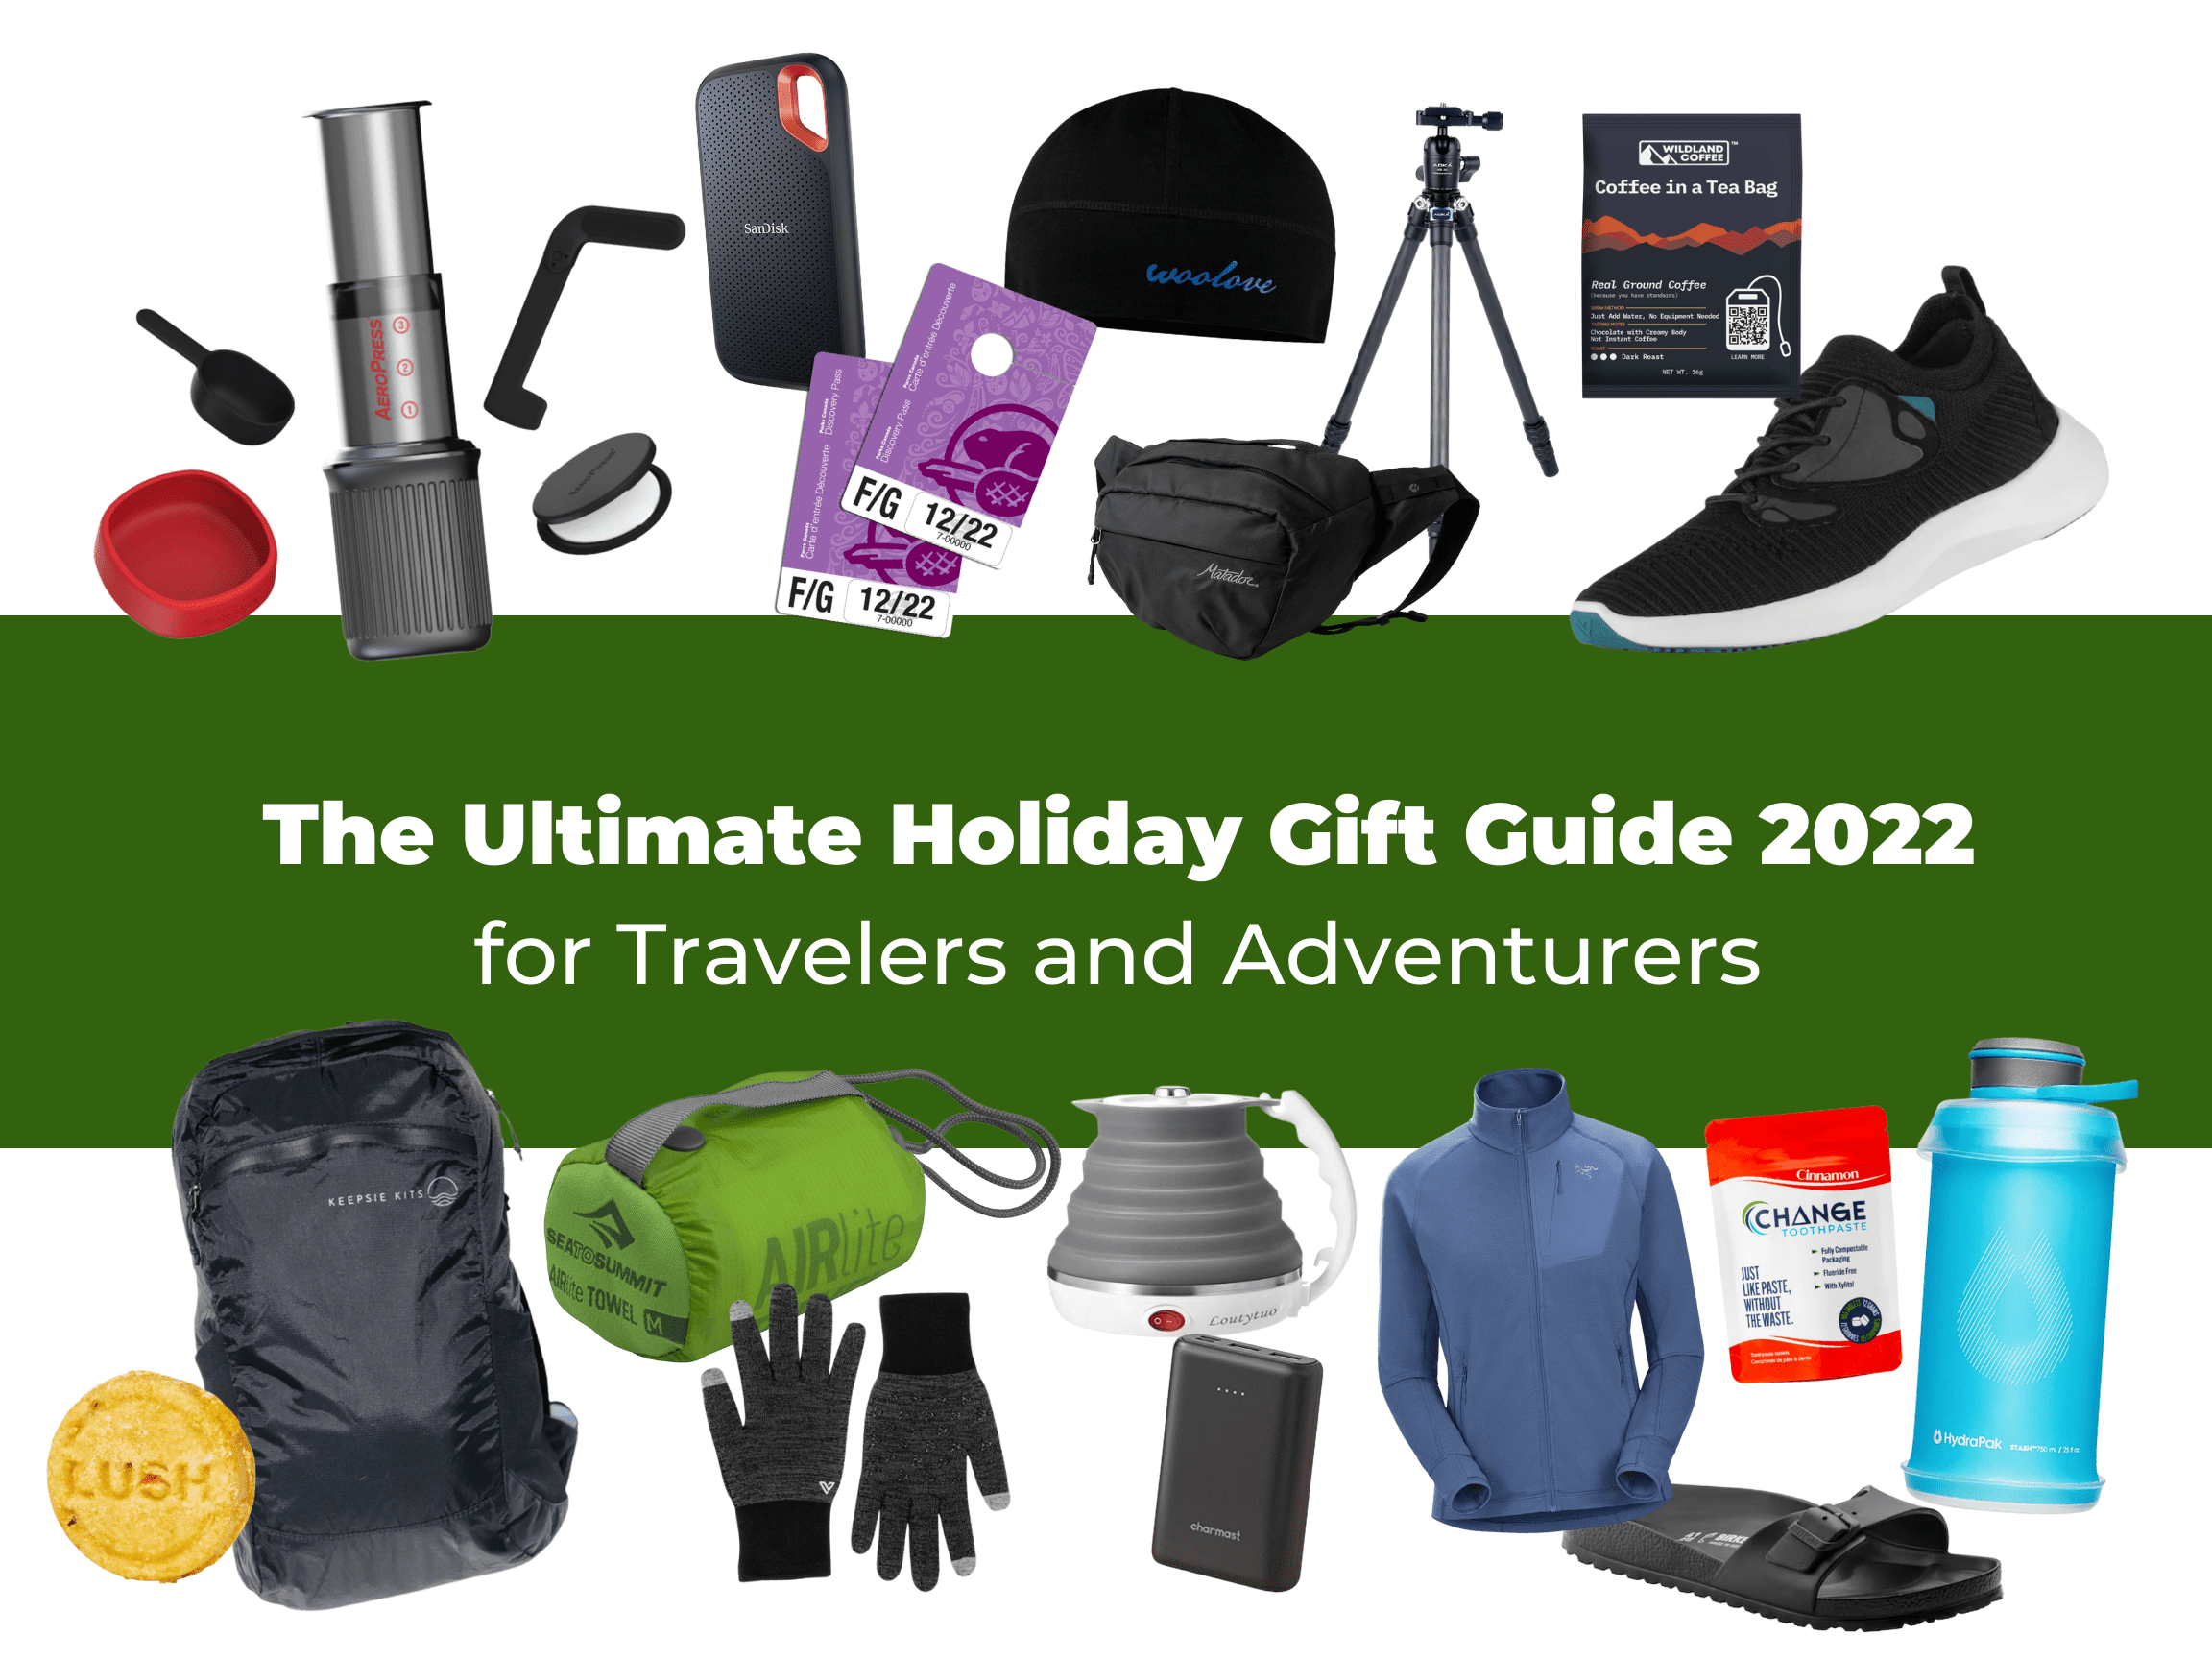 https://www.ajourneyinspired.com/wp-content/uploads/2023/01/The-Ultimate-Holiday-Gift-Guide-2022-For-Travelers-and-Outdoor-Adventurers-1.png